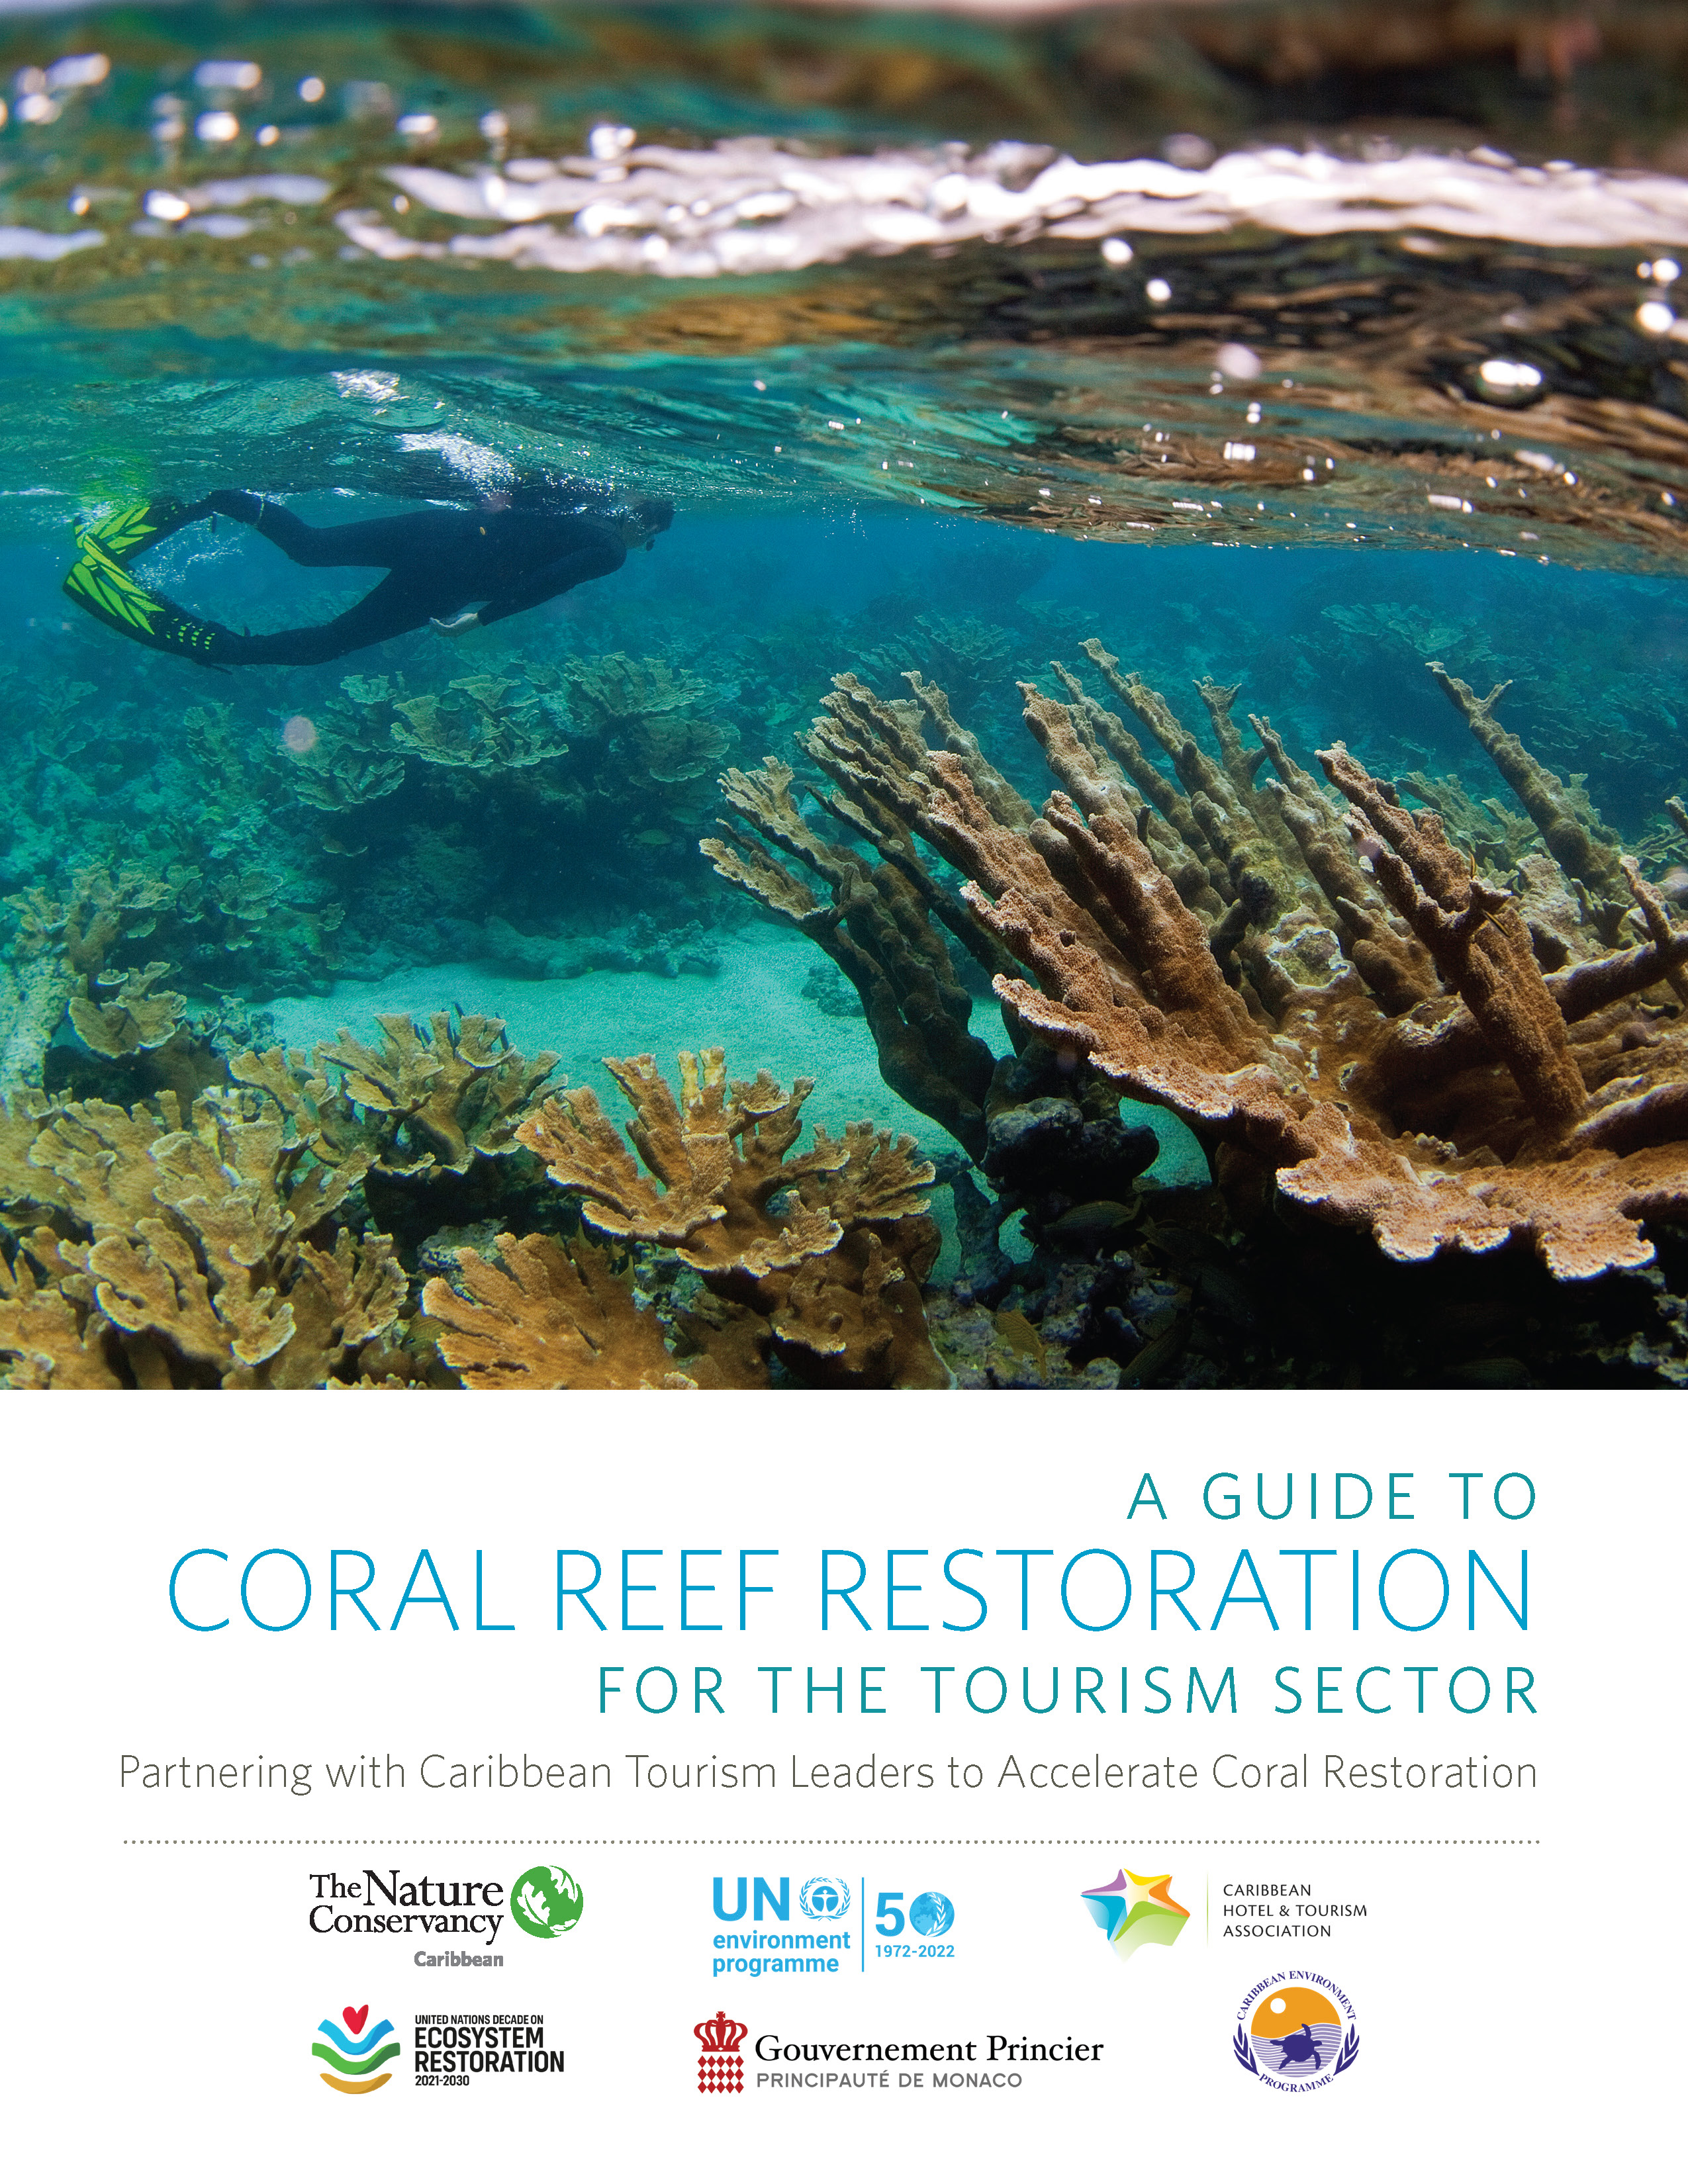 cover page of Coral Restoration Guide, with image of a diver swimming over corals beneath the surface of the ocean